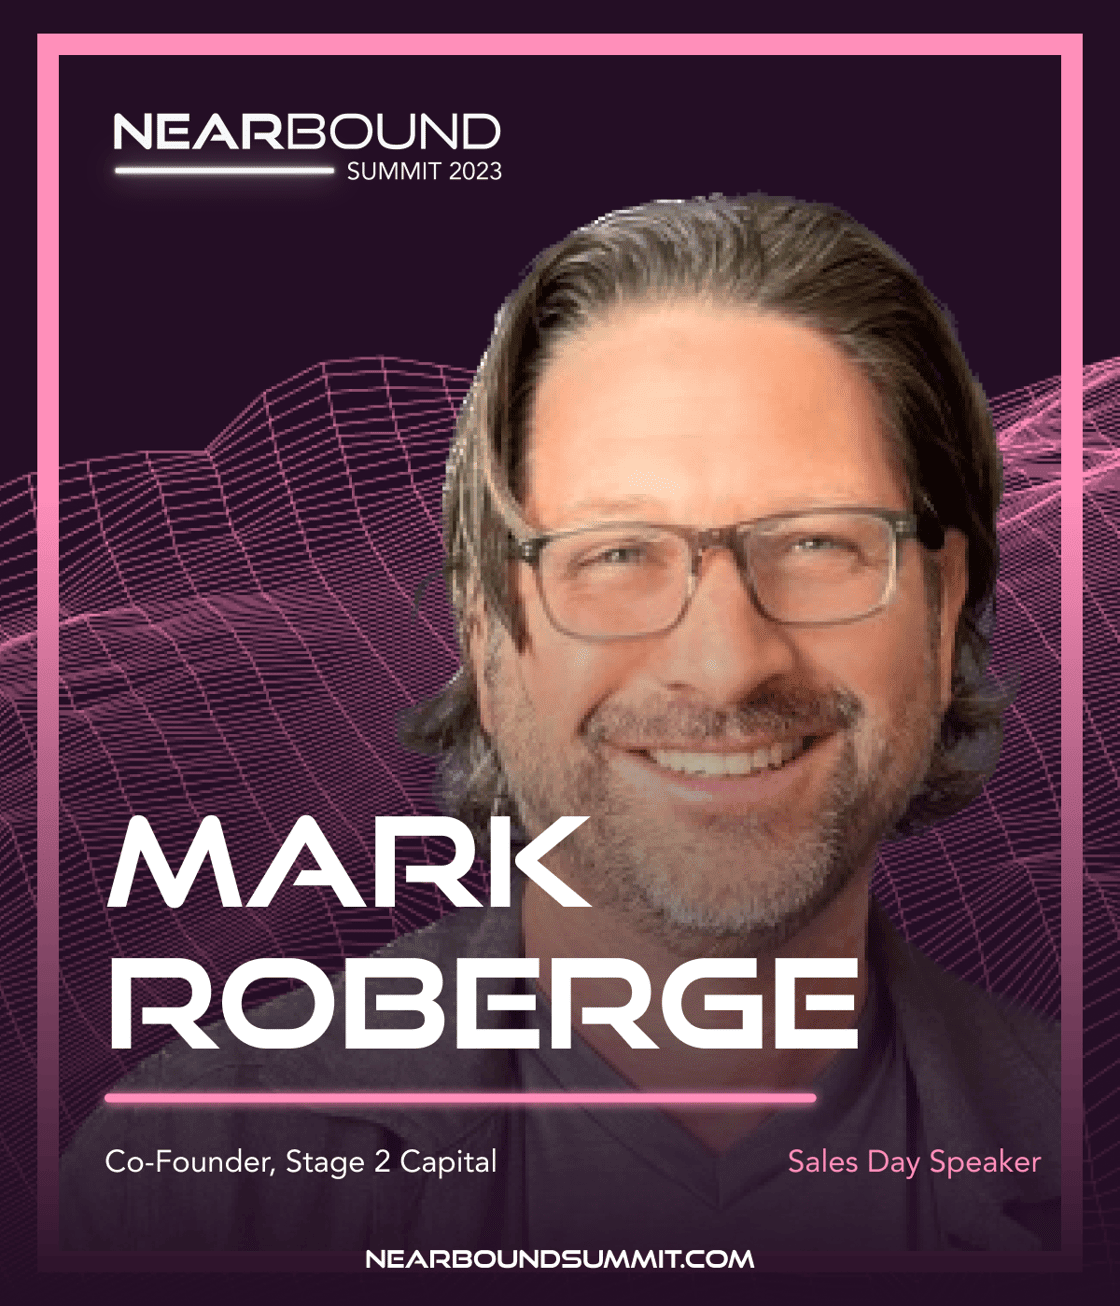 Mark Roberge - Sales Day